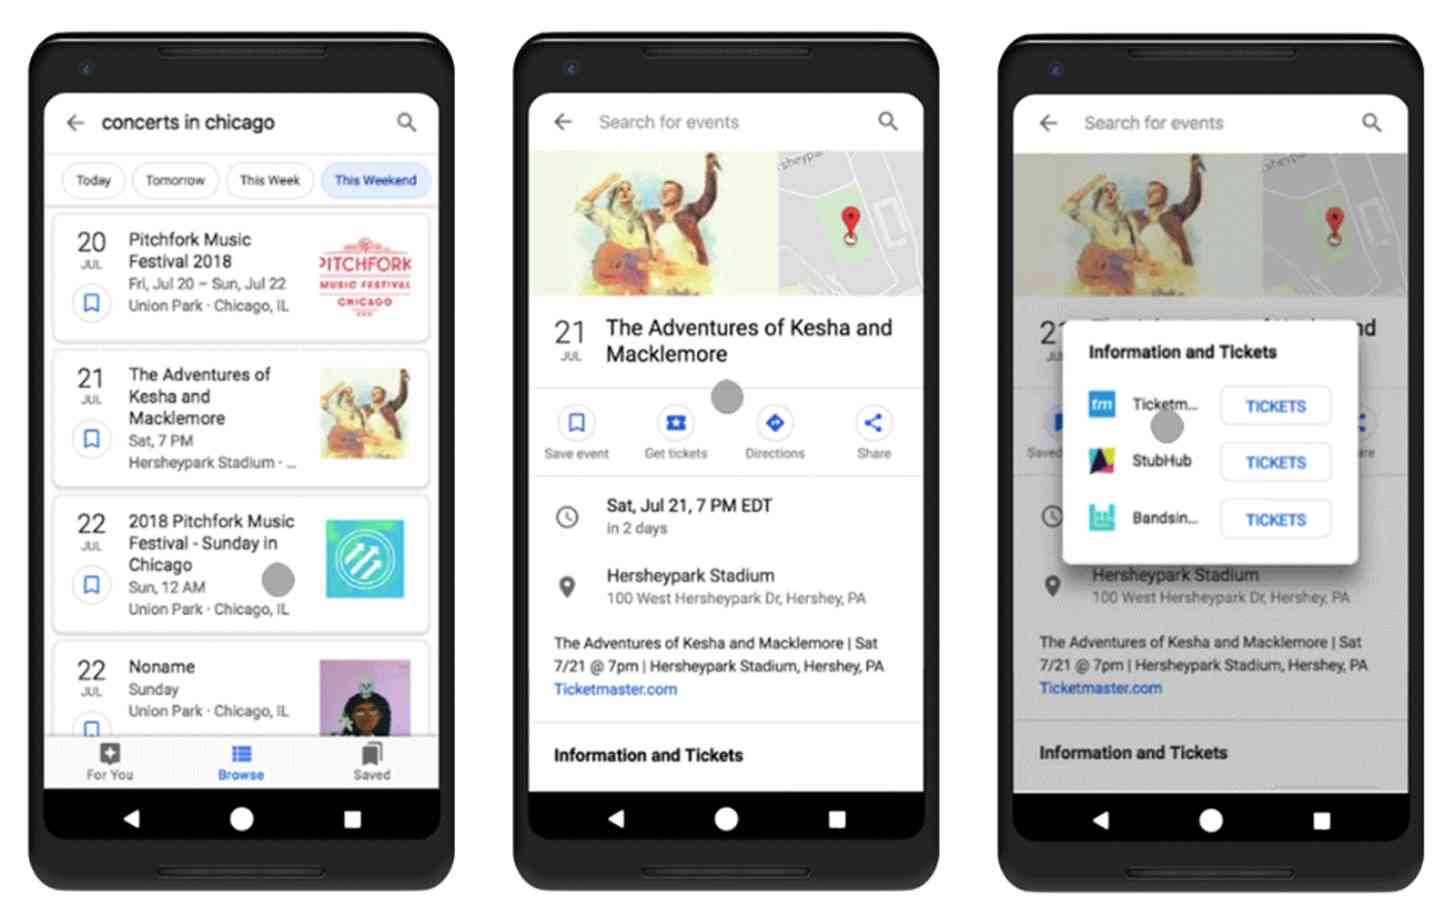 Google Search new local events features